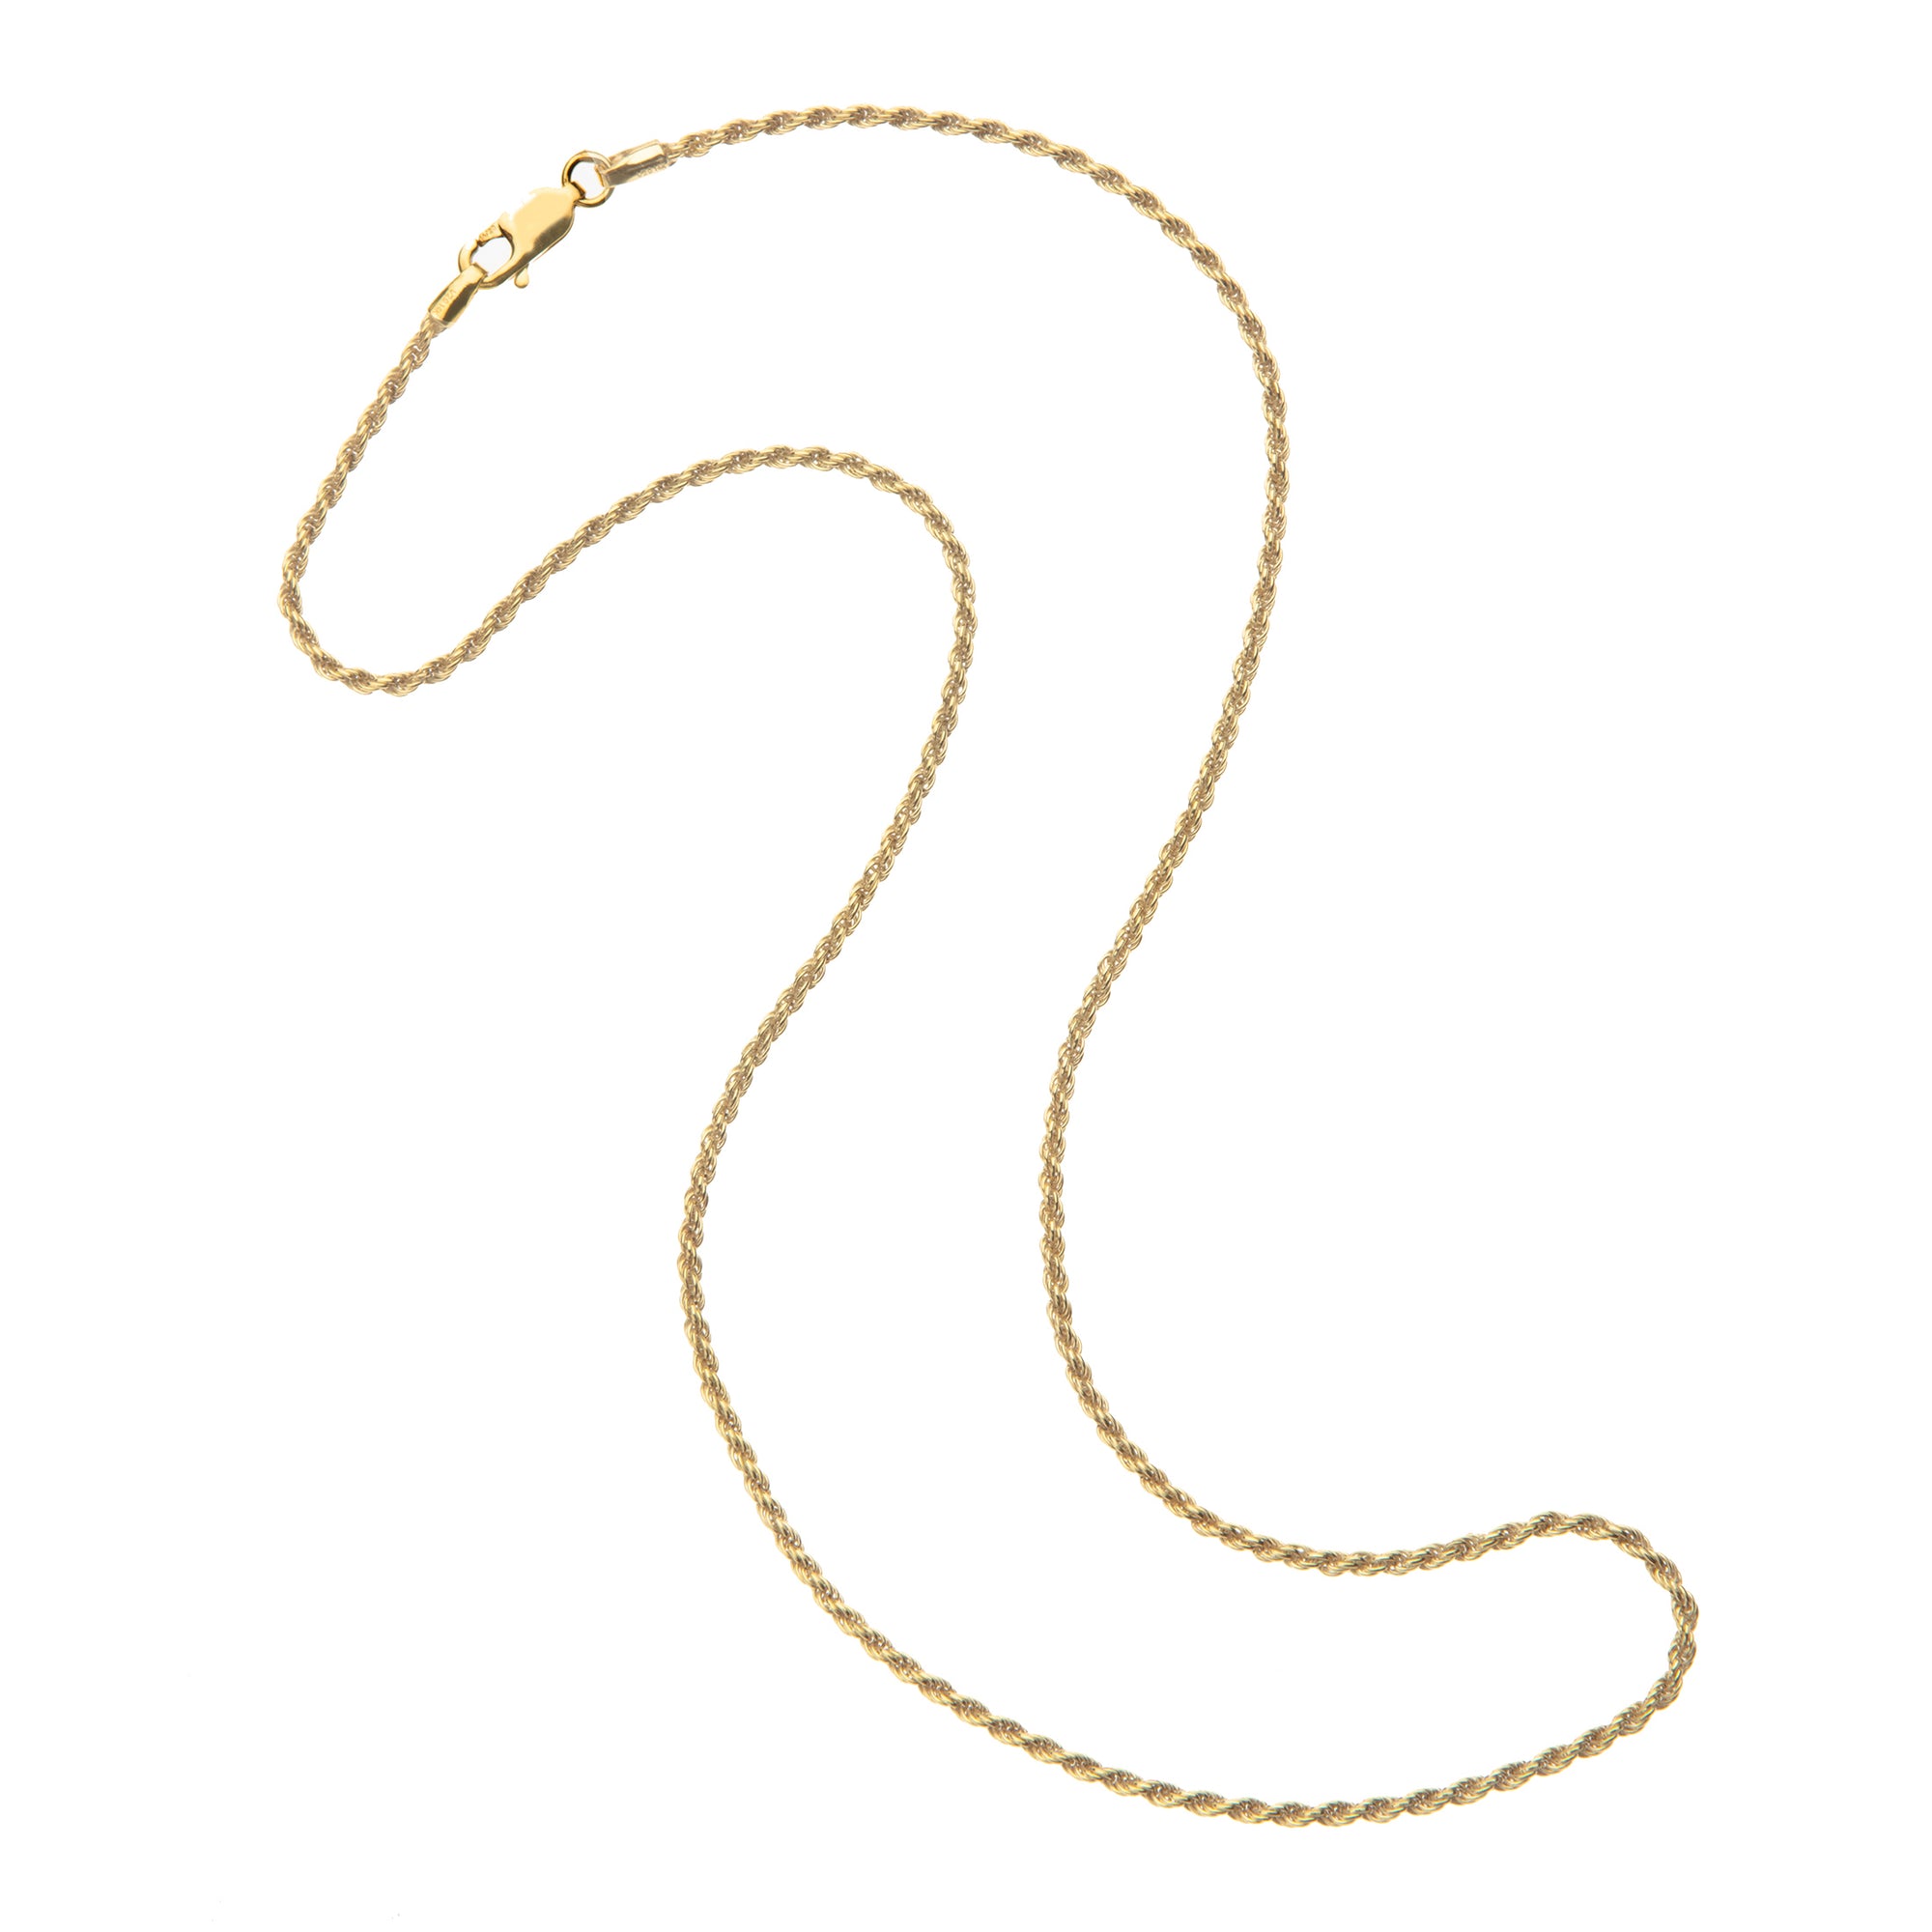 Gold Filled Delicate Rope Chain